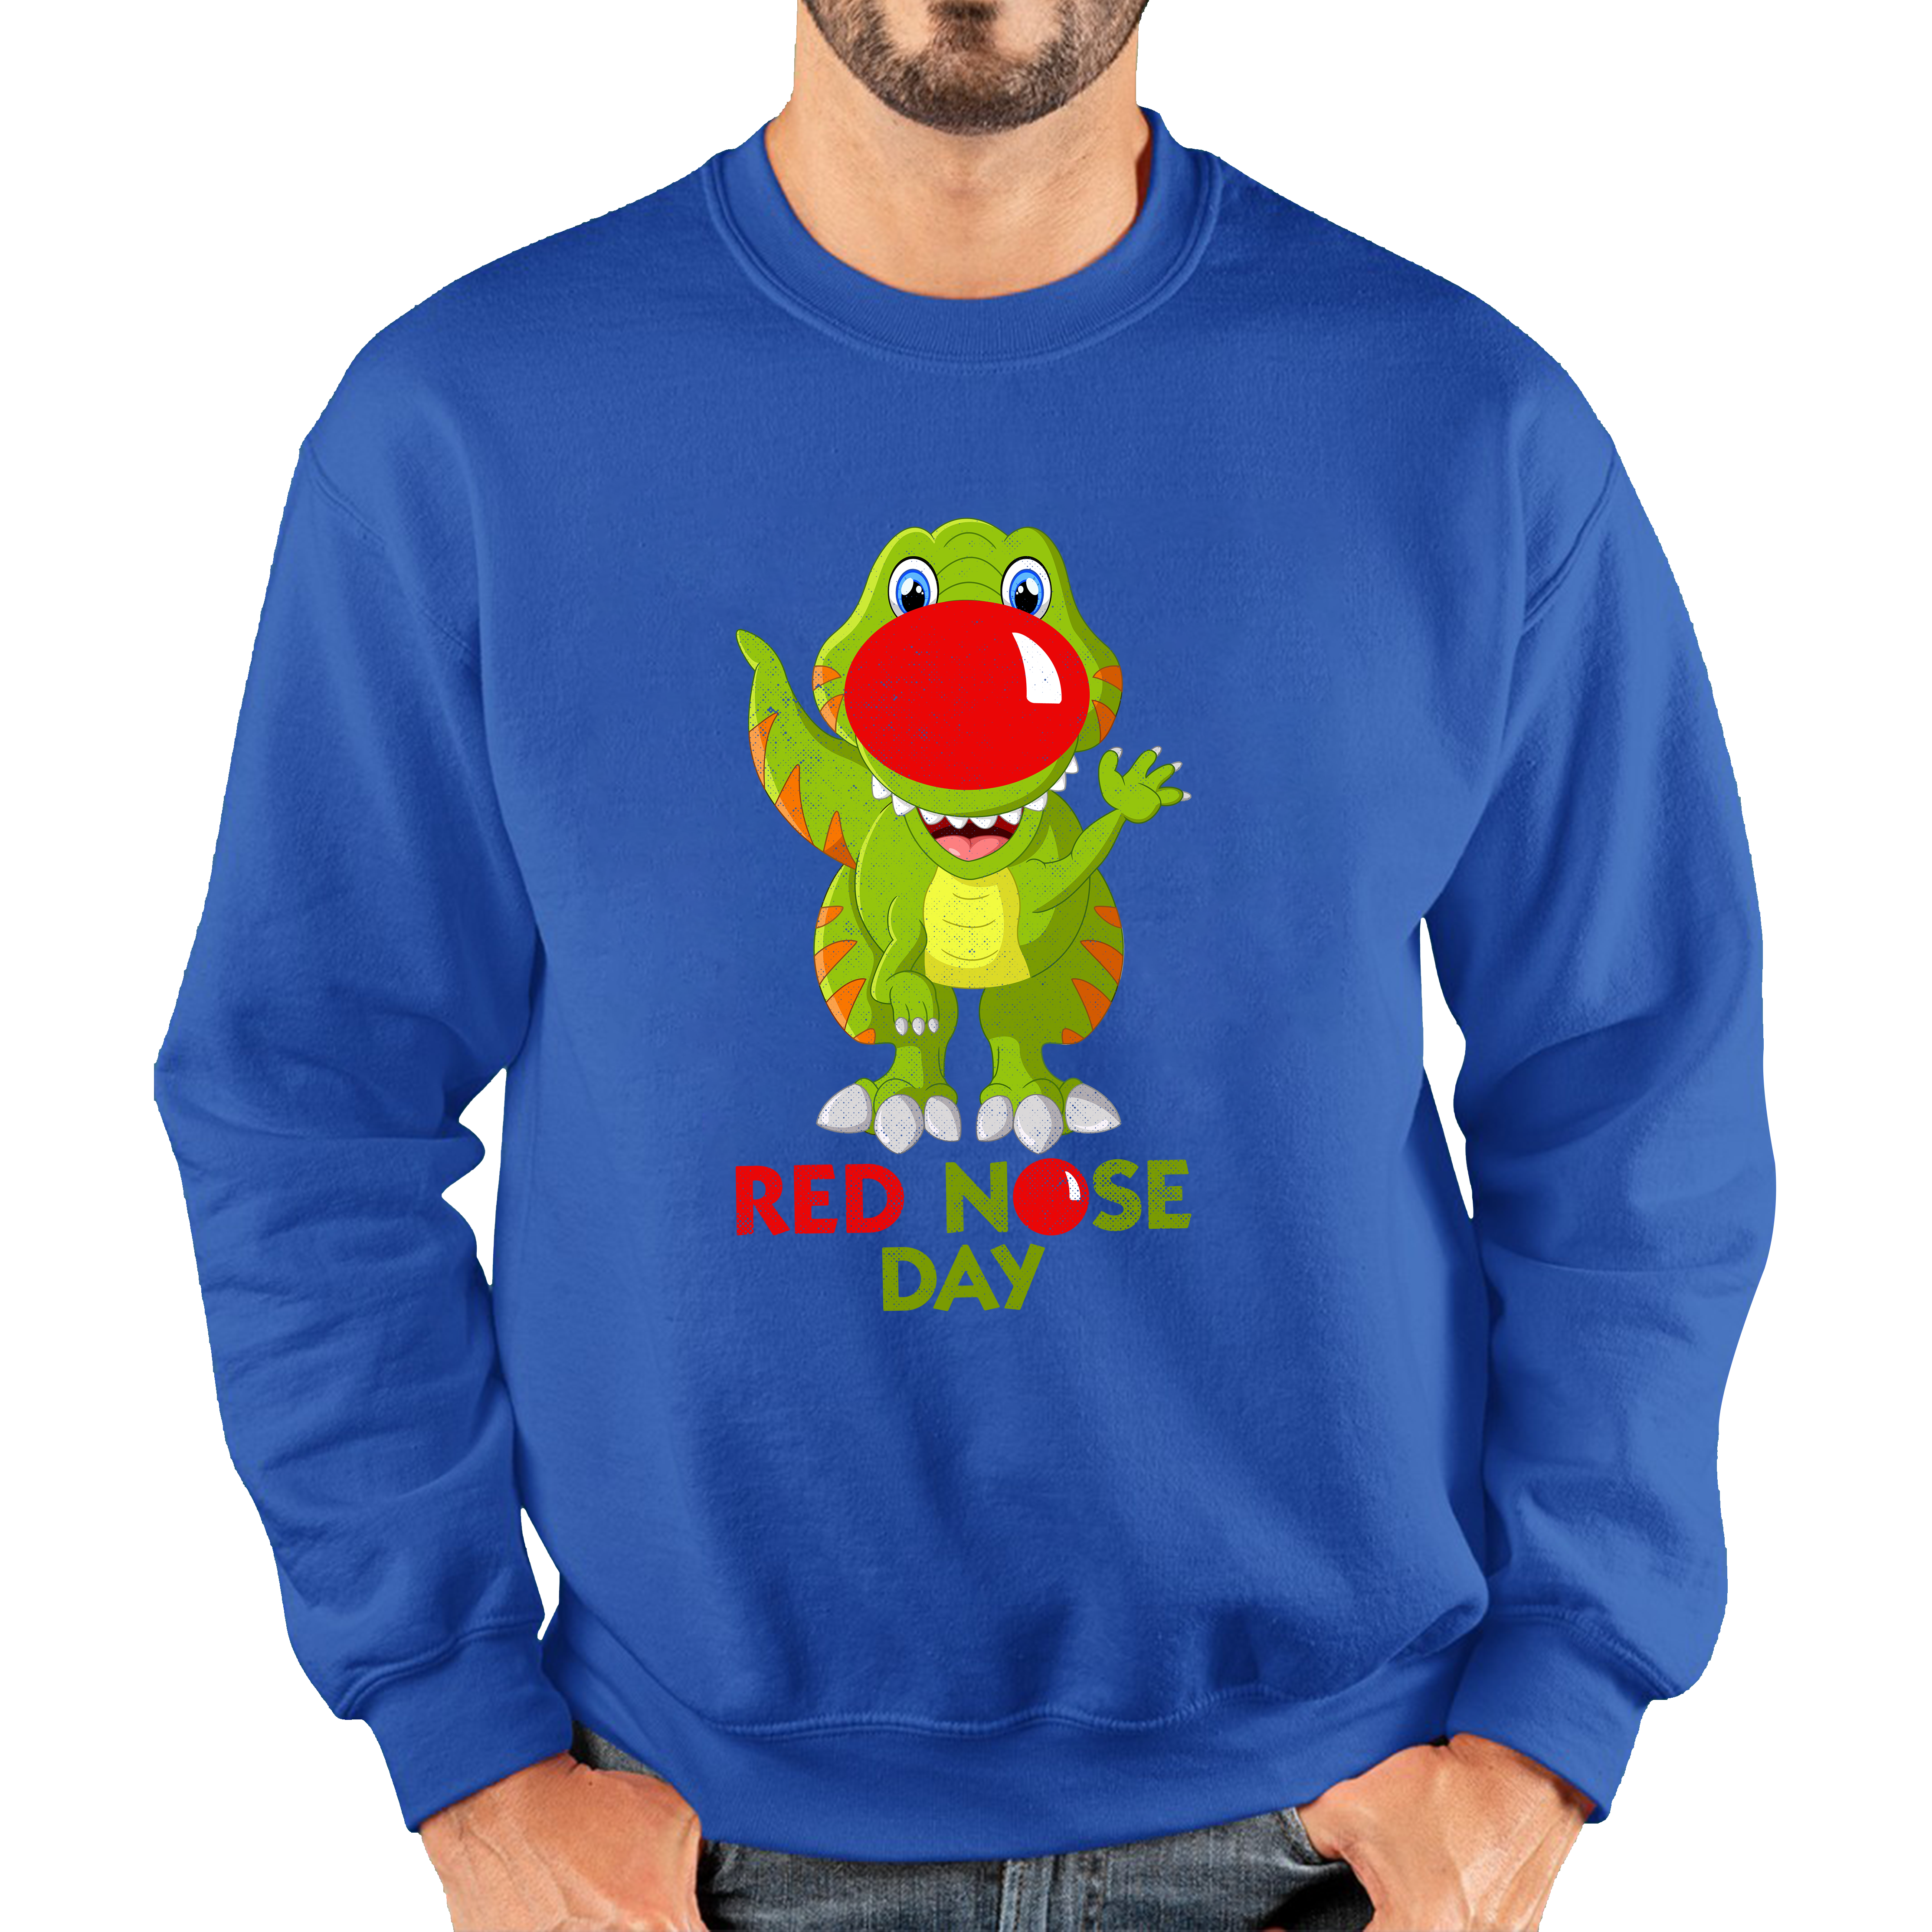 Funny Dinosaur Red Nose Day Adult Sweatshirt. 50% Goes To Charity